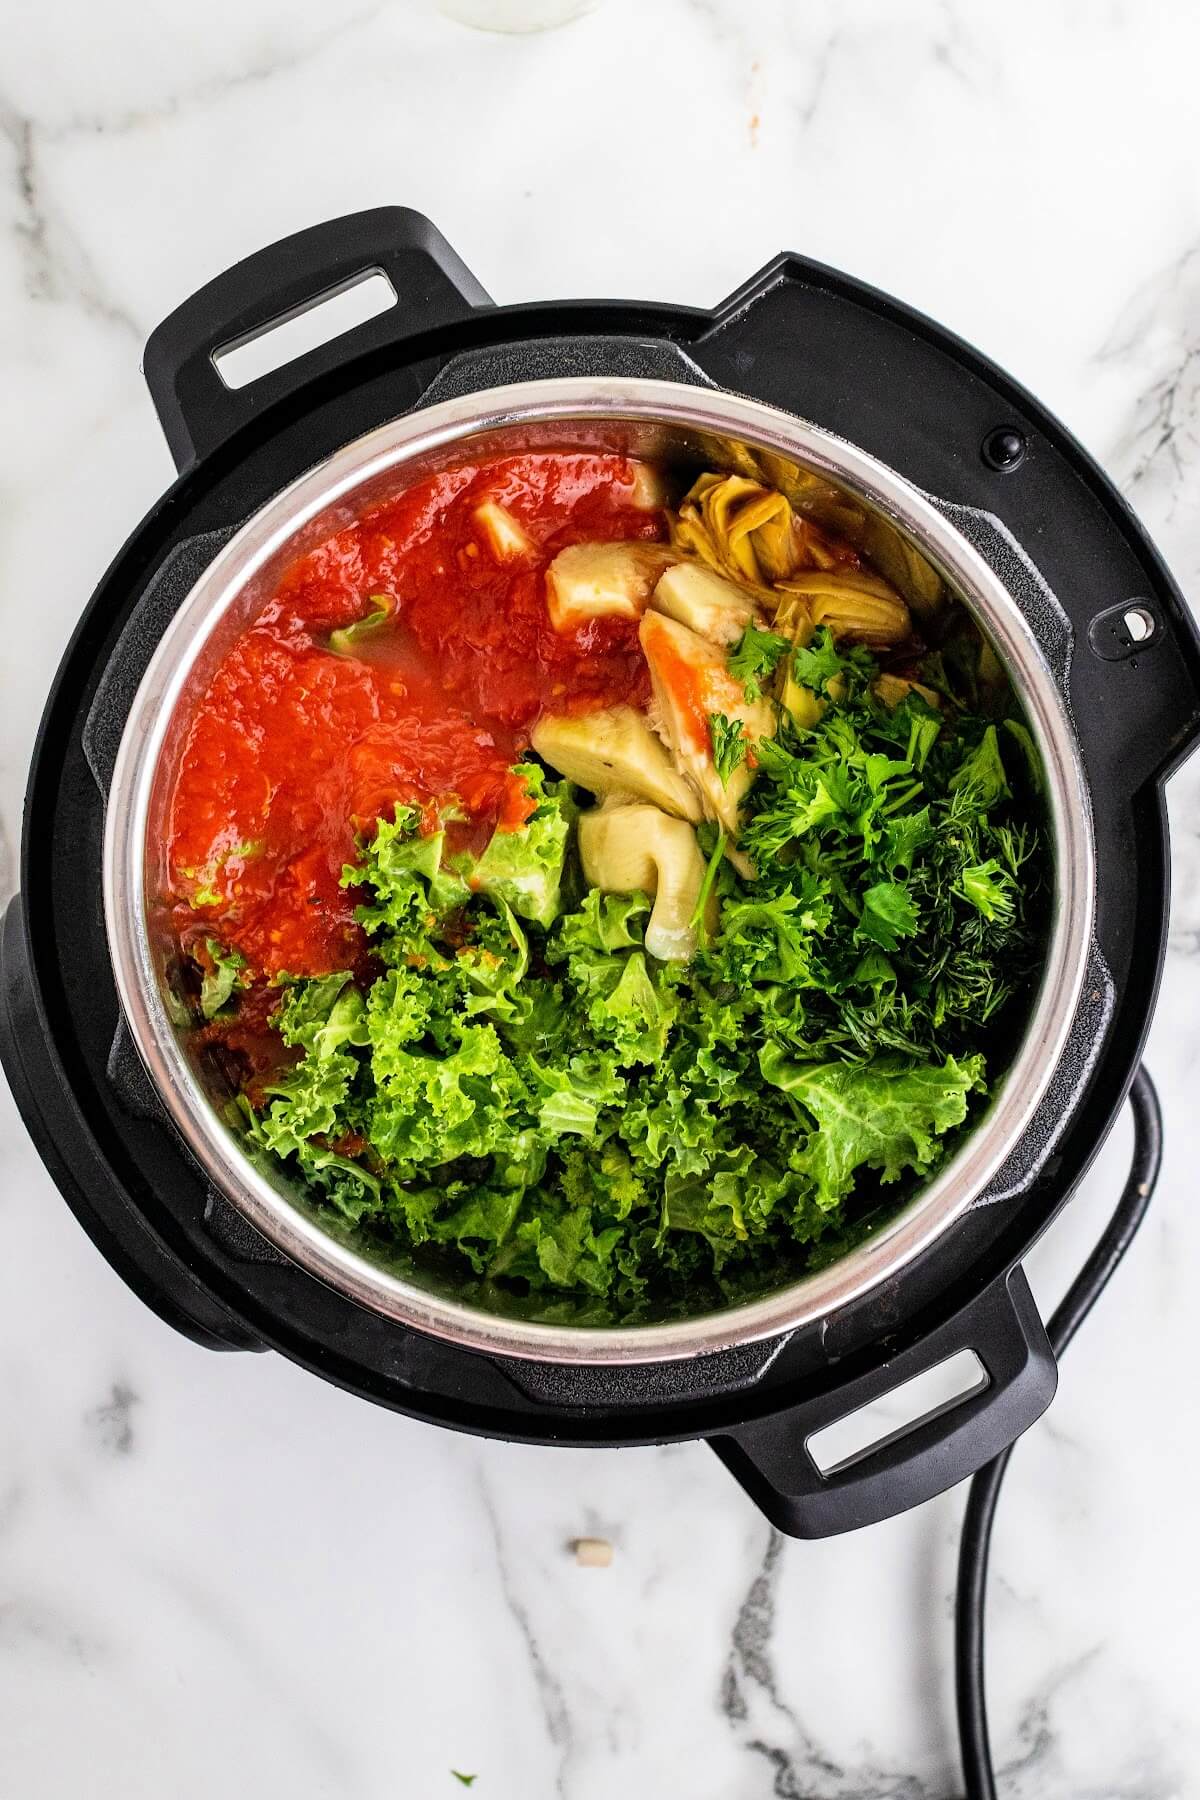 Overhead shot of an Instant Pot filled with crushed tomatoes, fresh kale, fresh herbs and artichoke hearts.